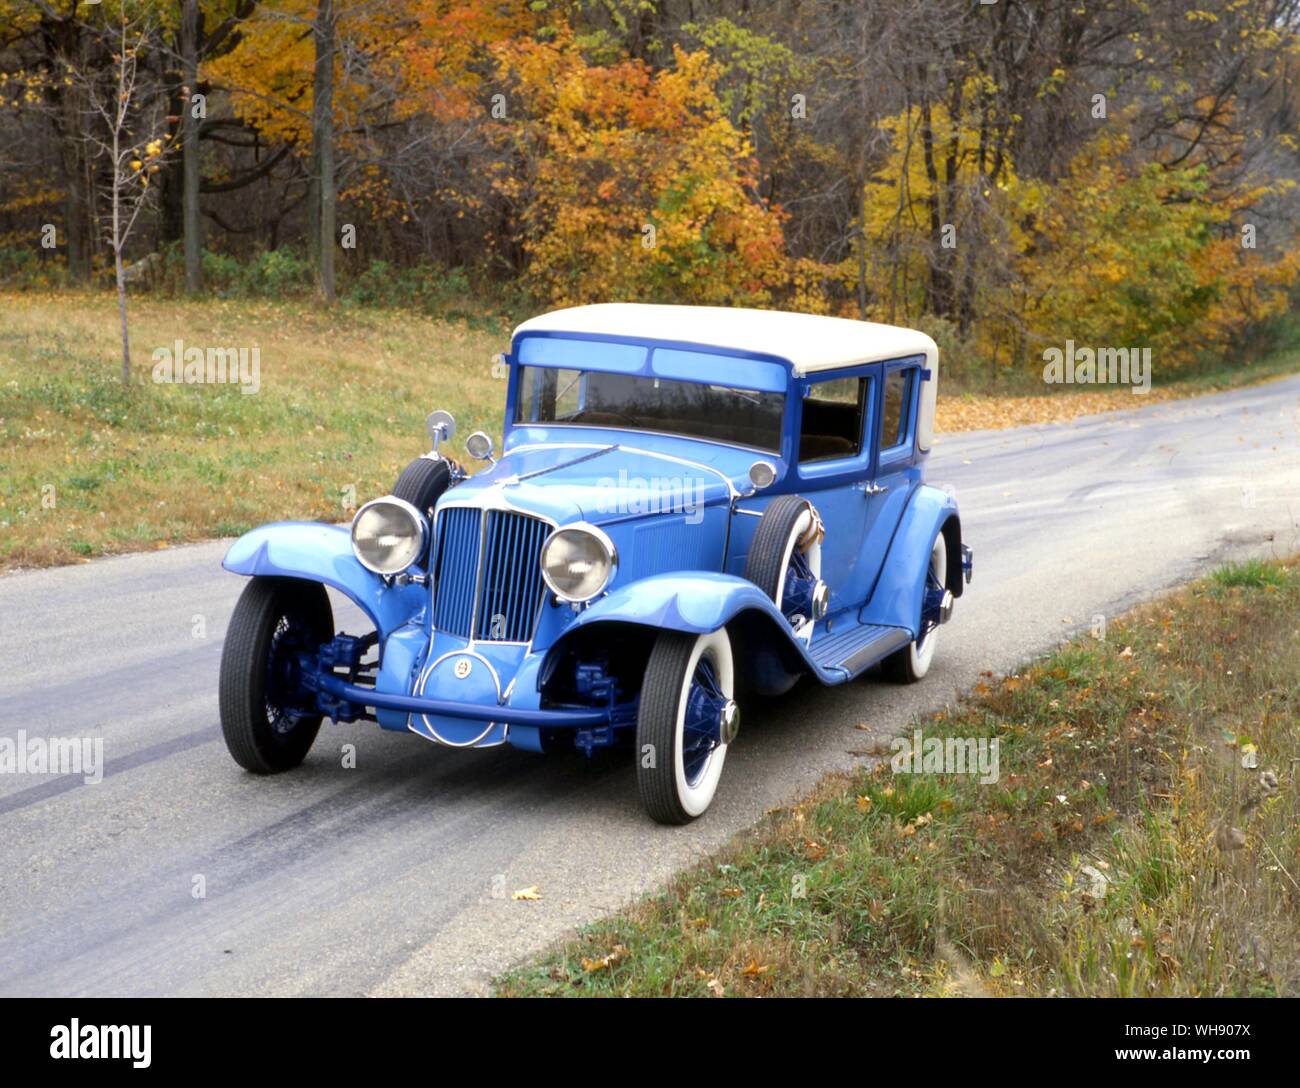 1930 Cord 129 Brougham, bodied by Central, a subsidiary of teh A-C-D group.. Stock Photo